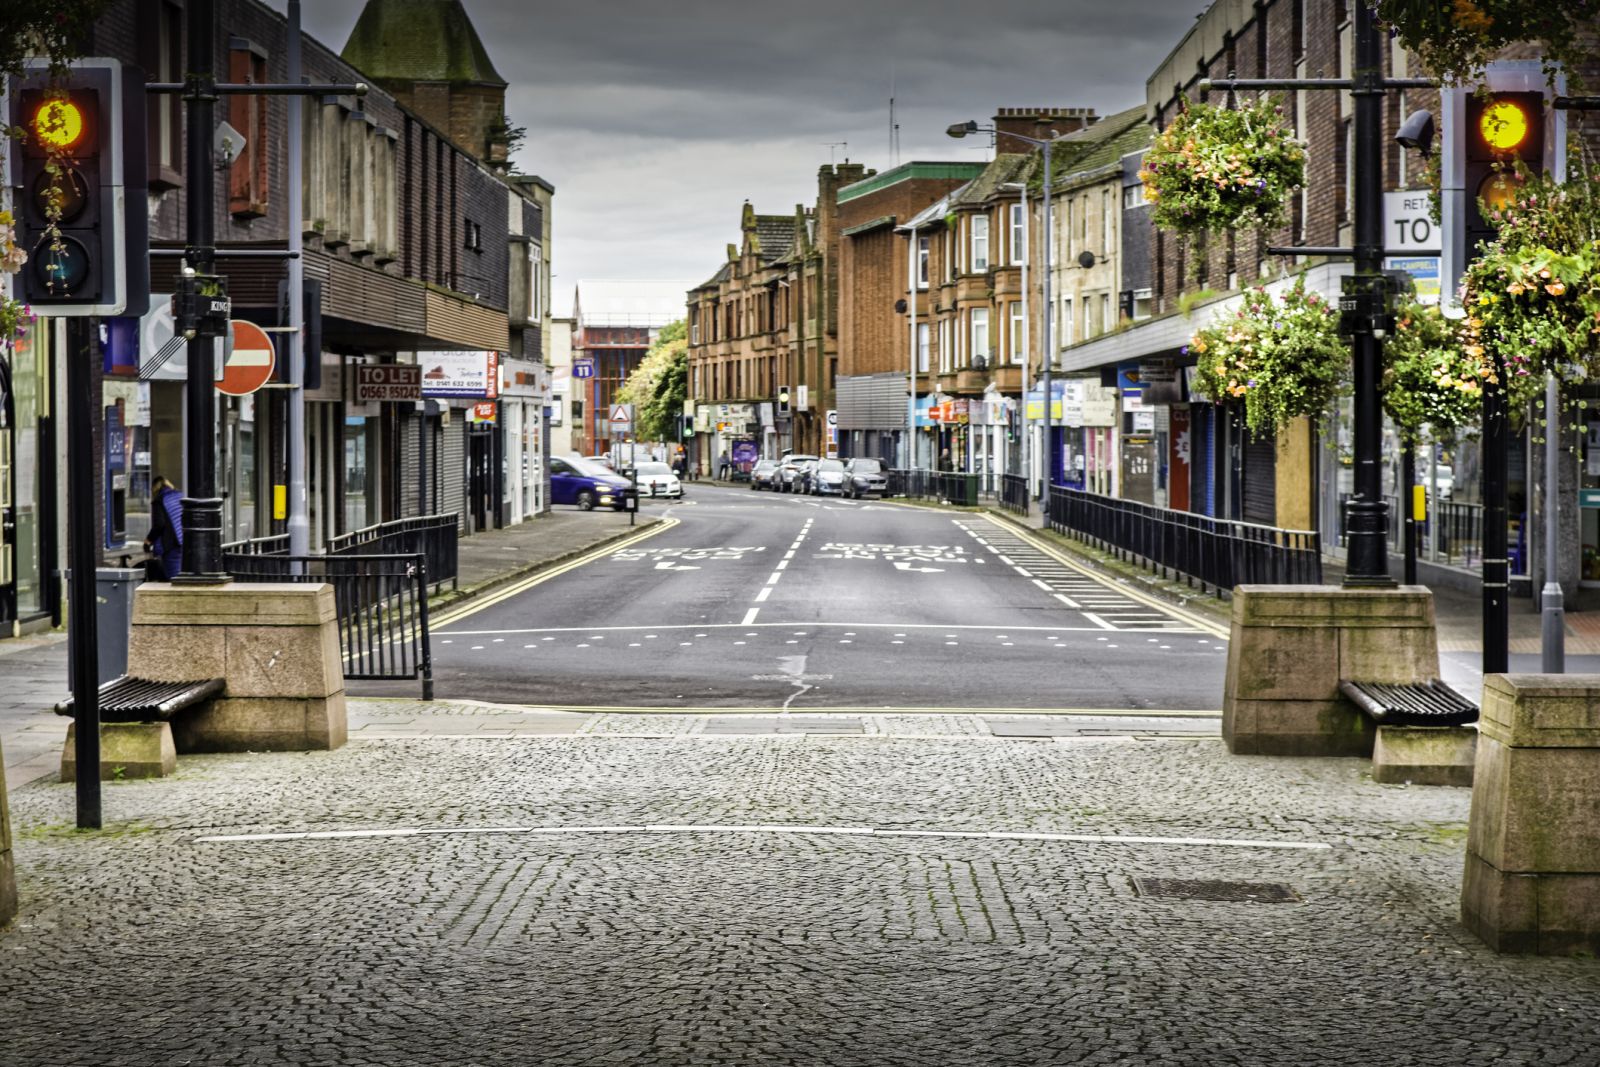 View of a street in a Scottish town banner image